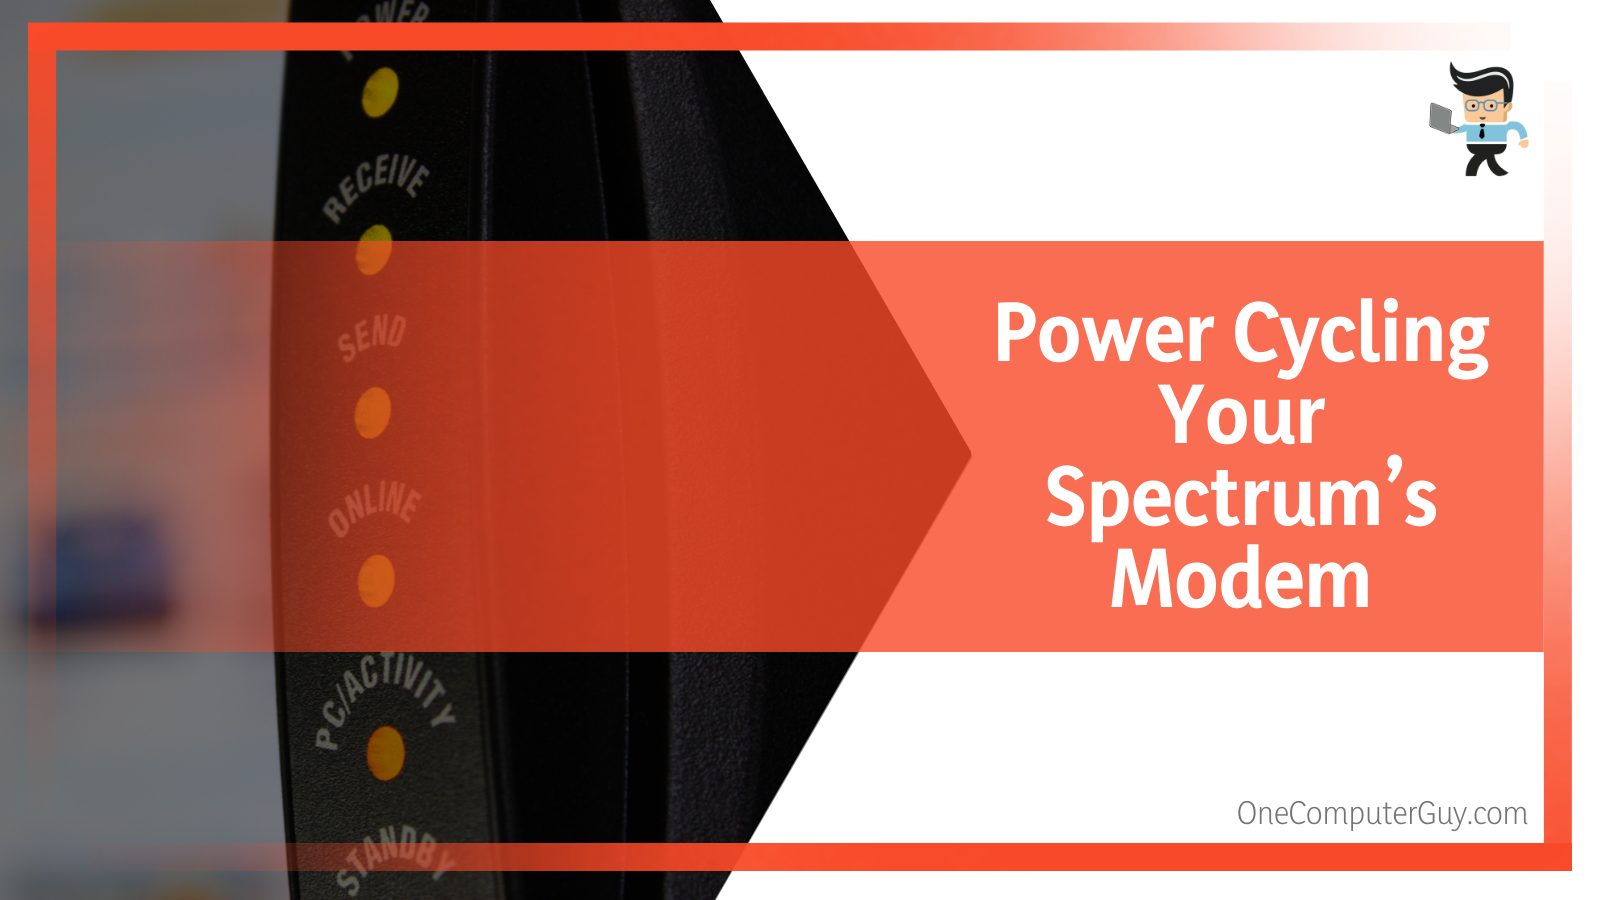 Power Cycling Your Spectrum’s Modem